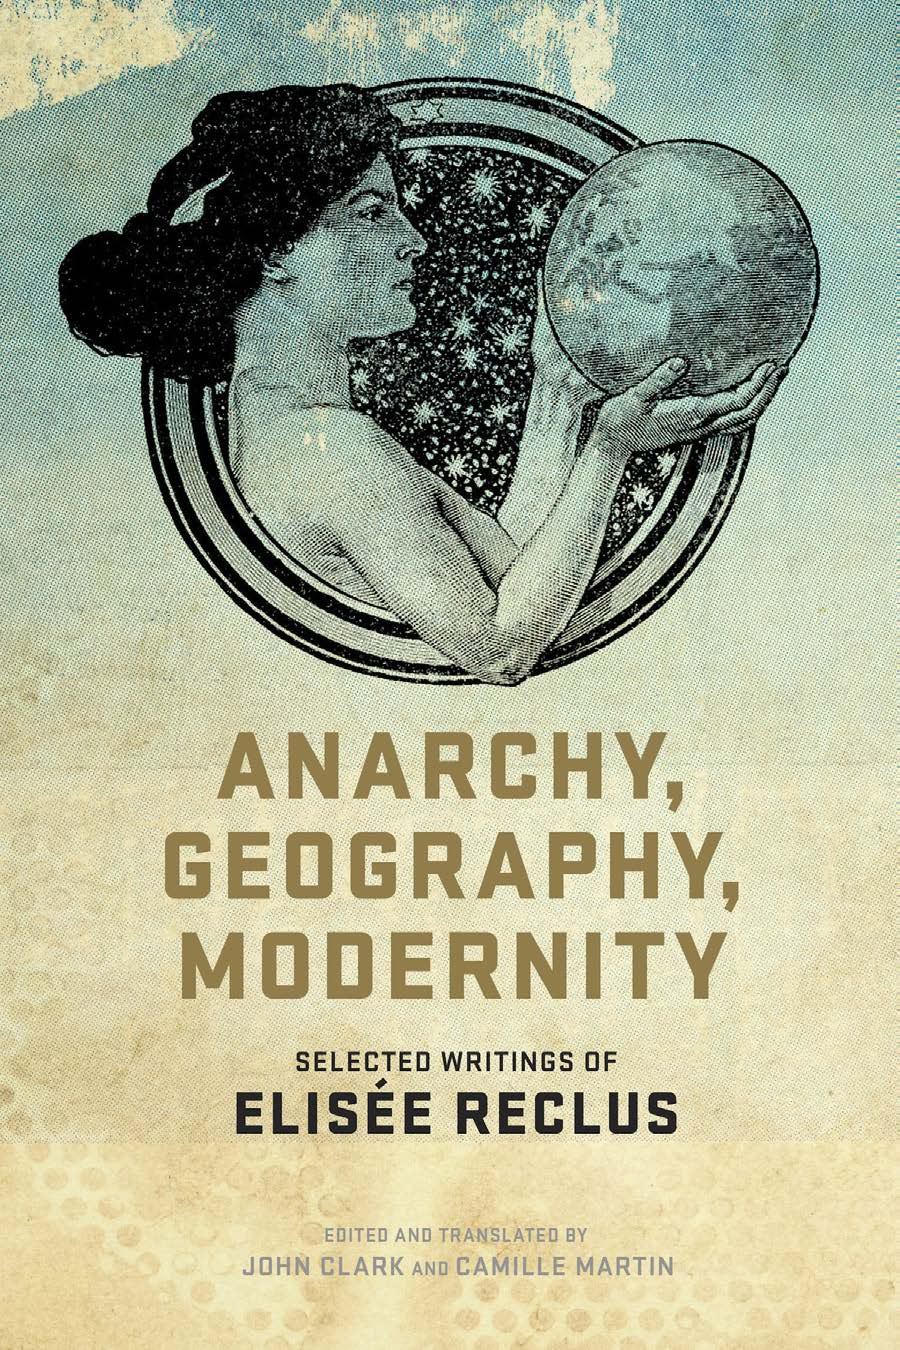 Anarchy, Geography, Modernity | The Anarchist Library